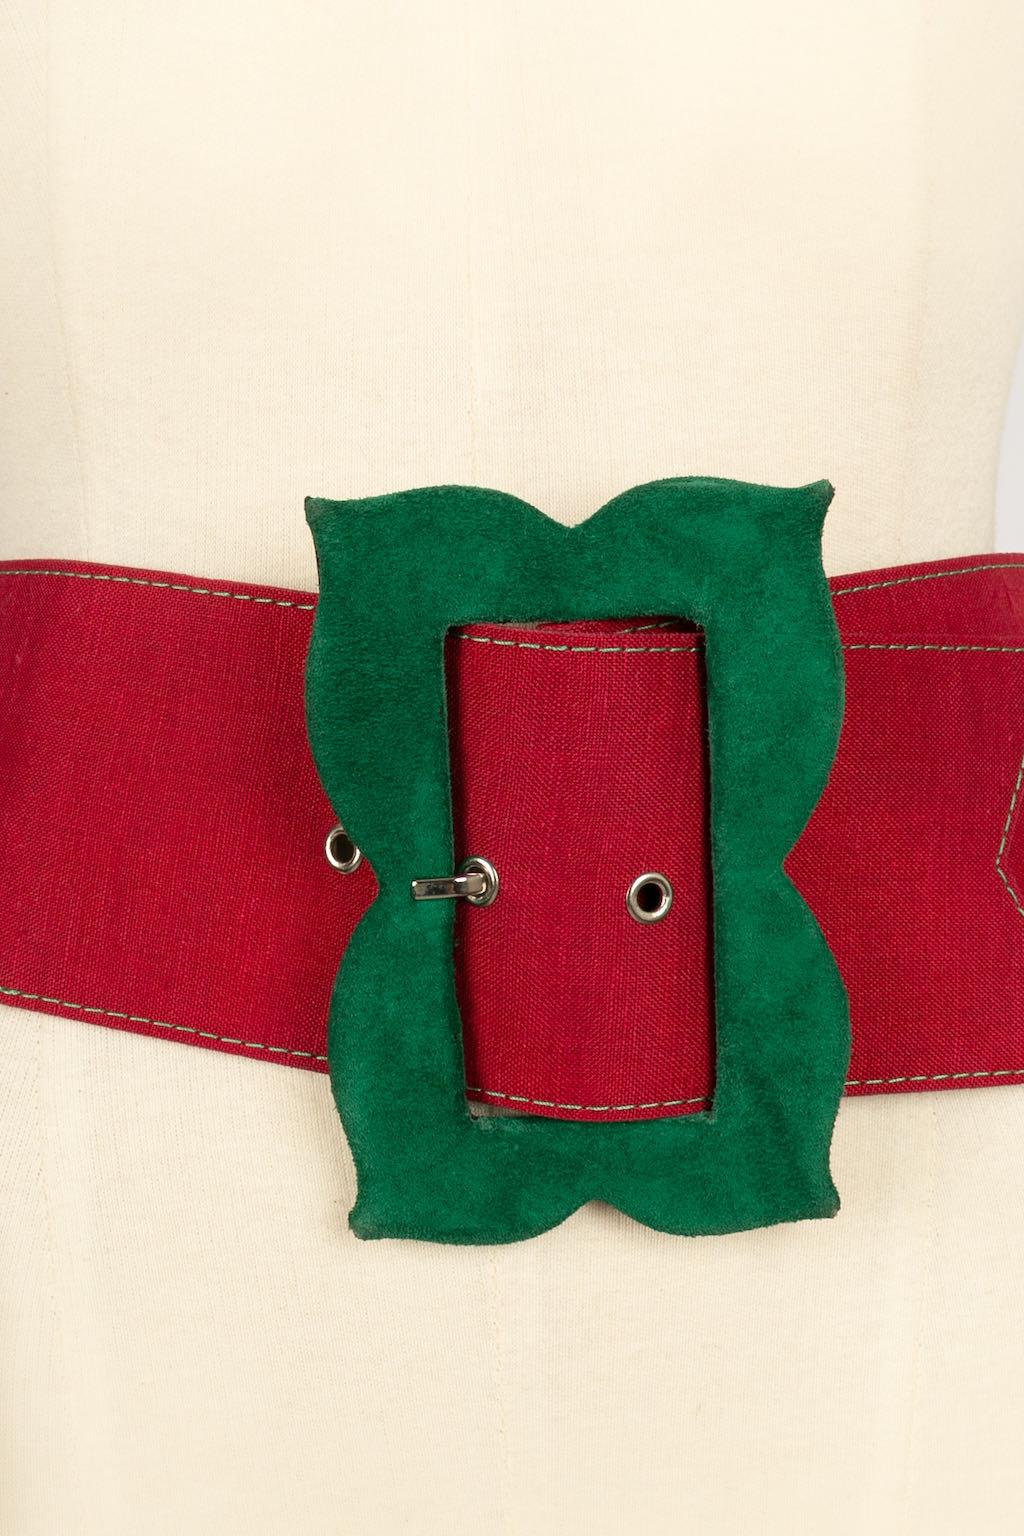 Chantal Thomass Black Leather and Red Cotton Belt, 1993 Fashion Show For Sale 2